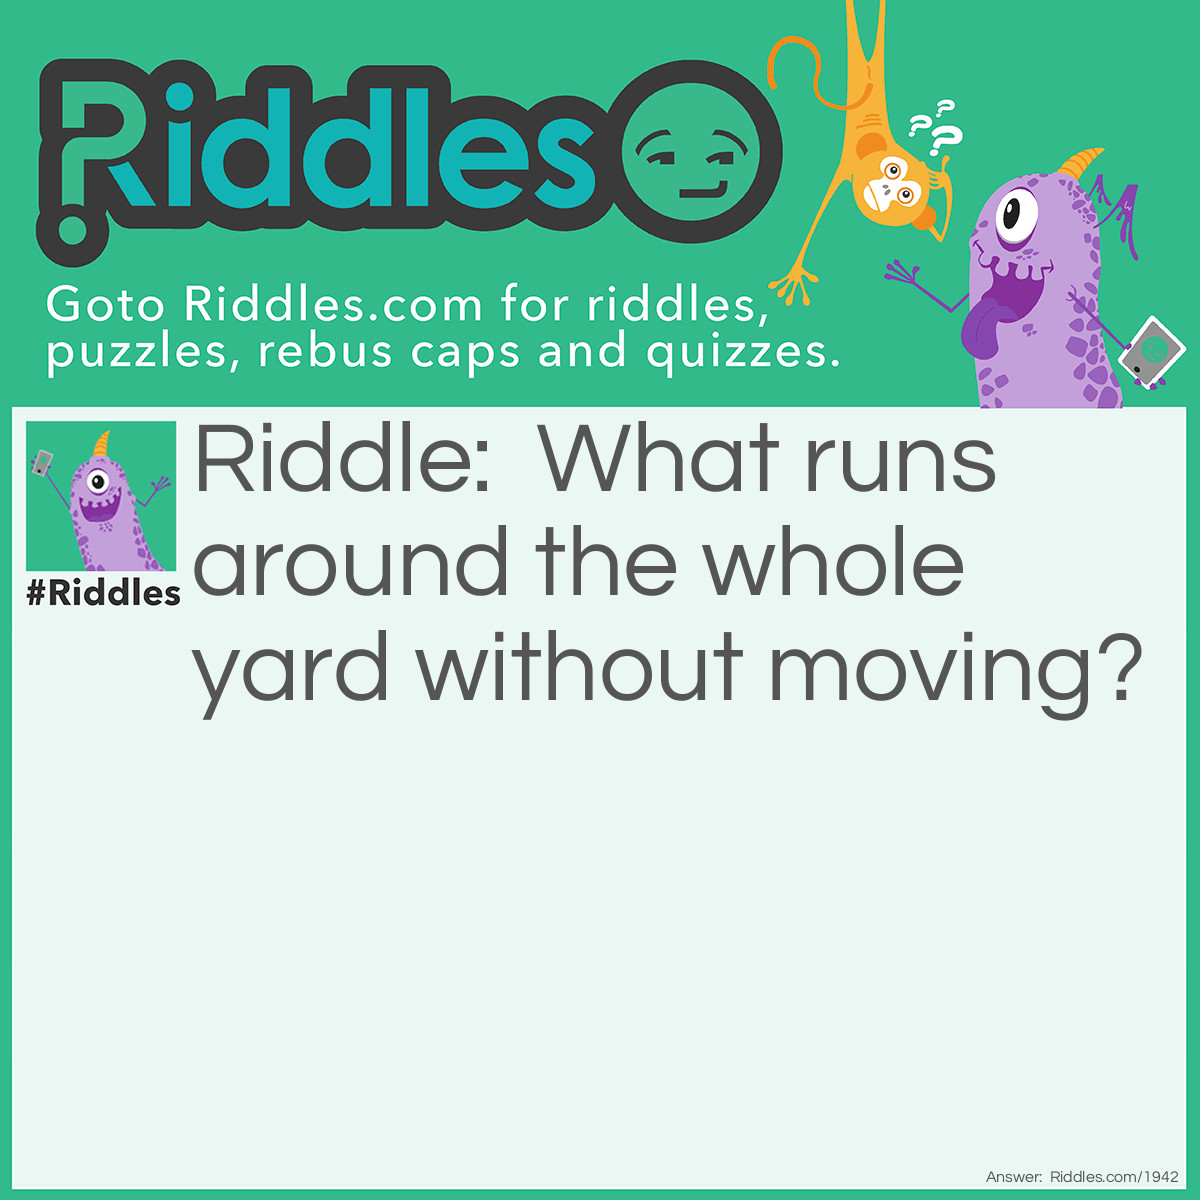 Riddle: What runs around the whole yard without moving? Answer: A fence.